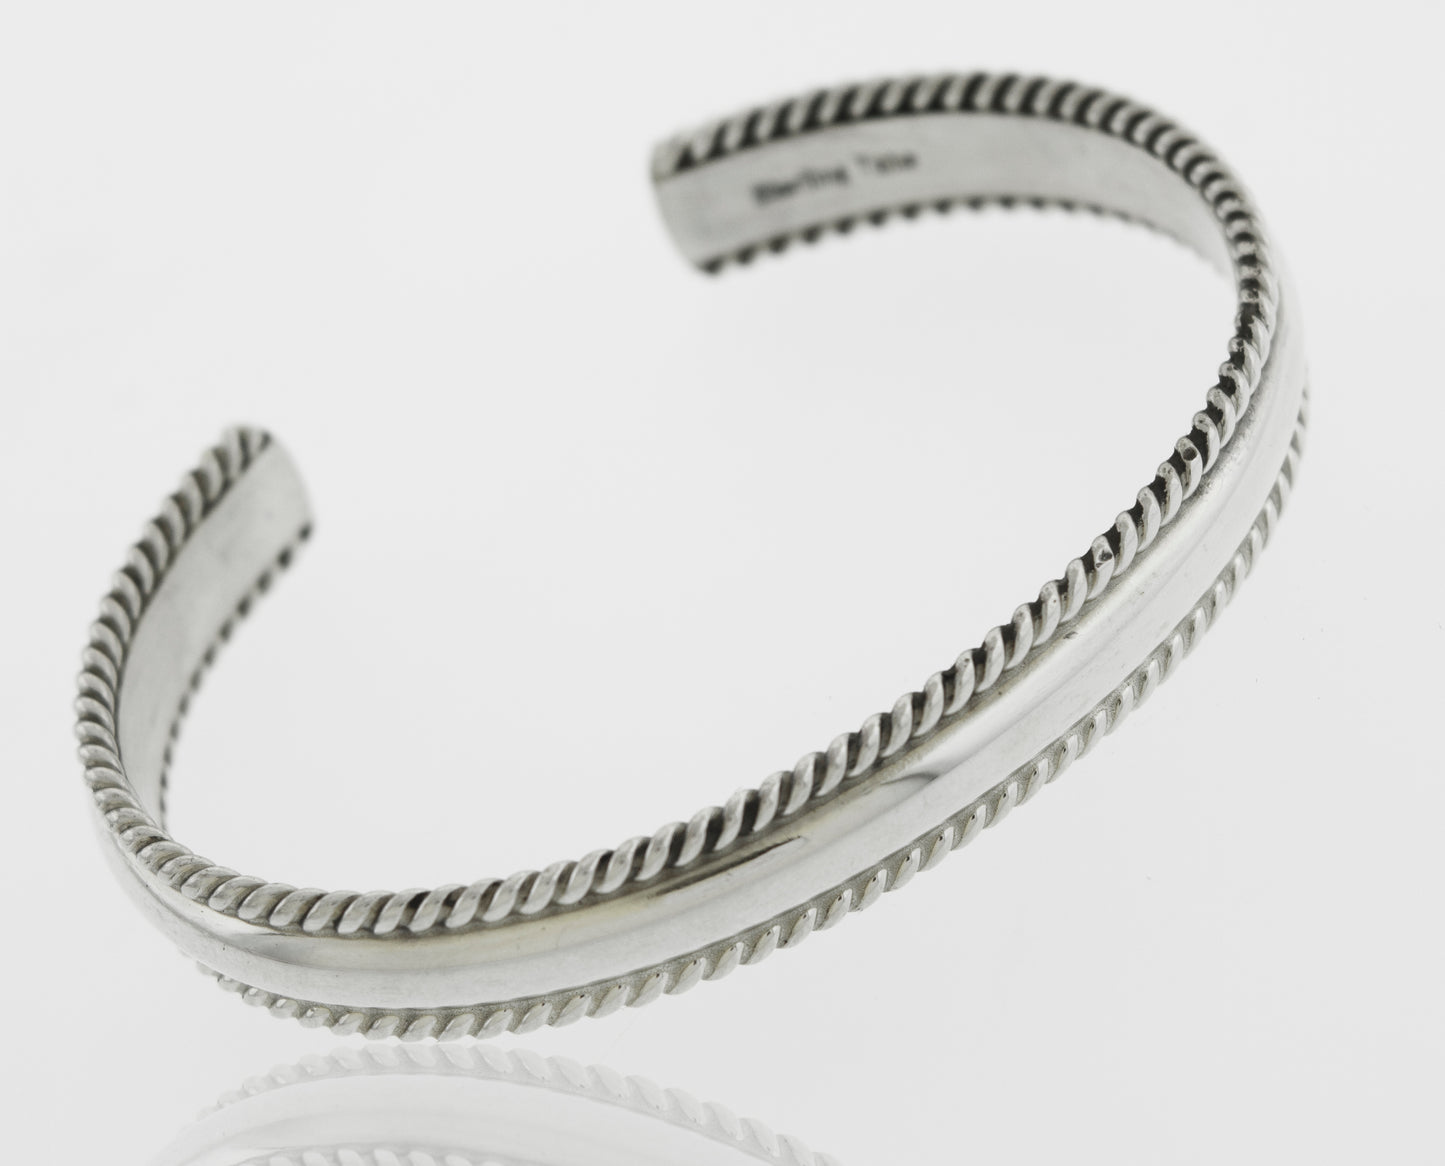 A beautiful Native American Handmade Silver Rope Cuff by Super Silver with a unique braided design.